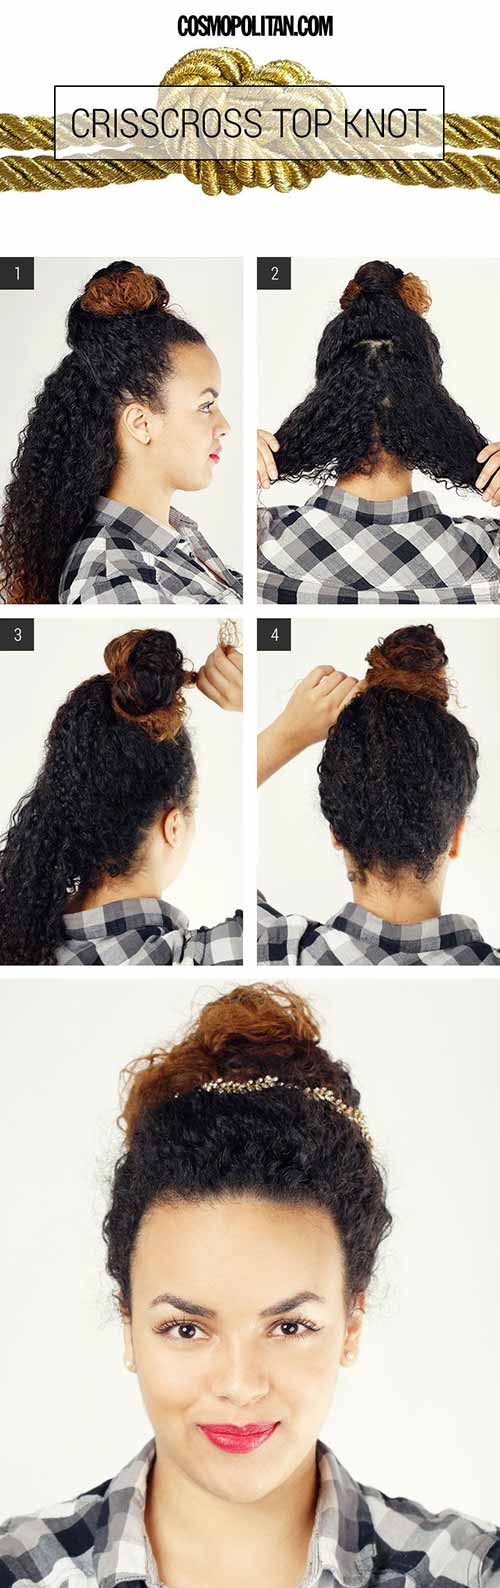 Messy Criss Cross Top Knot